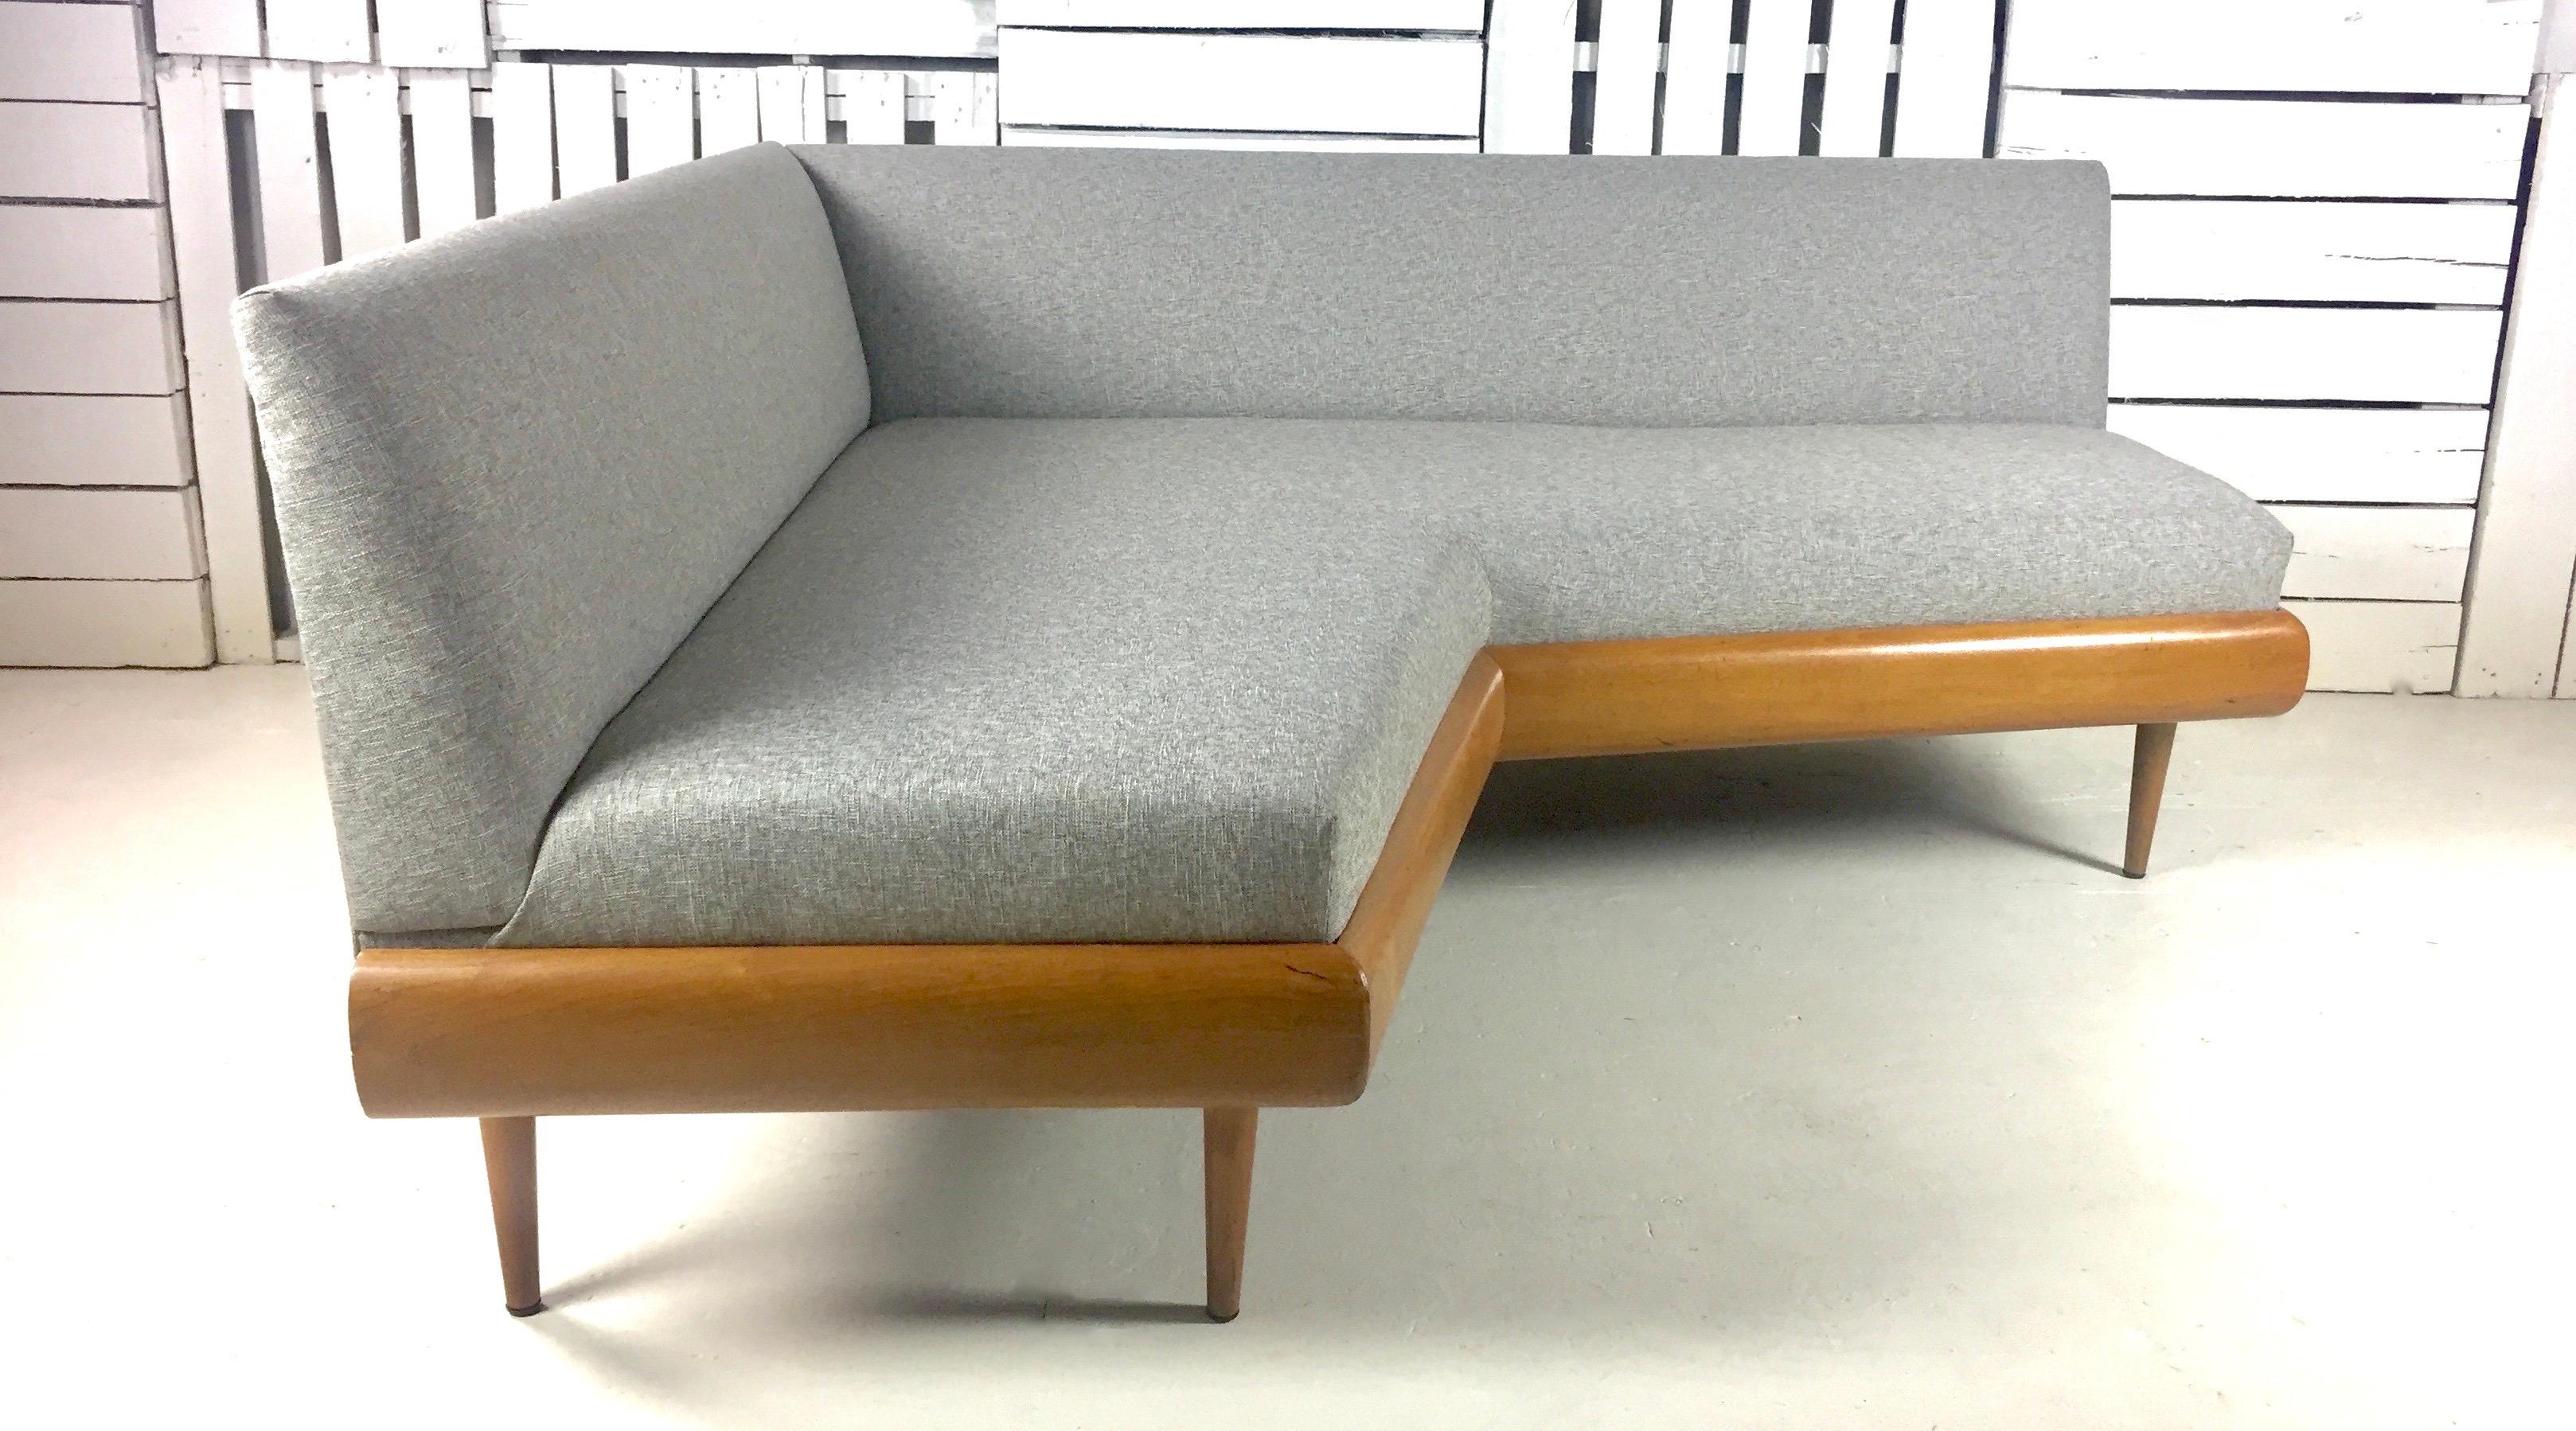 American Midcentury Adrian Pearsall Boomerang 1700 Sofa with Table 1705 Craft Associates